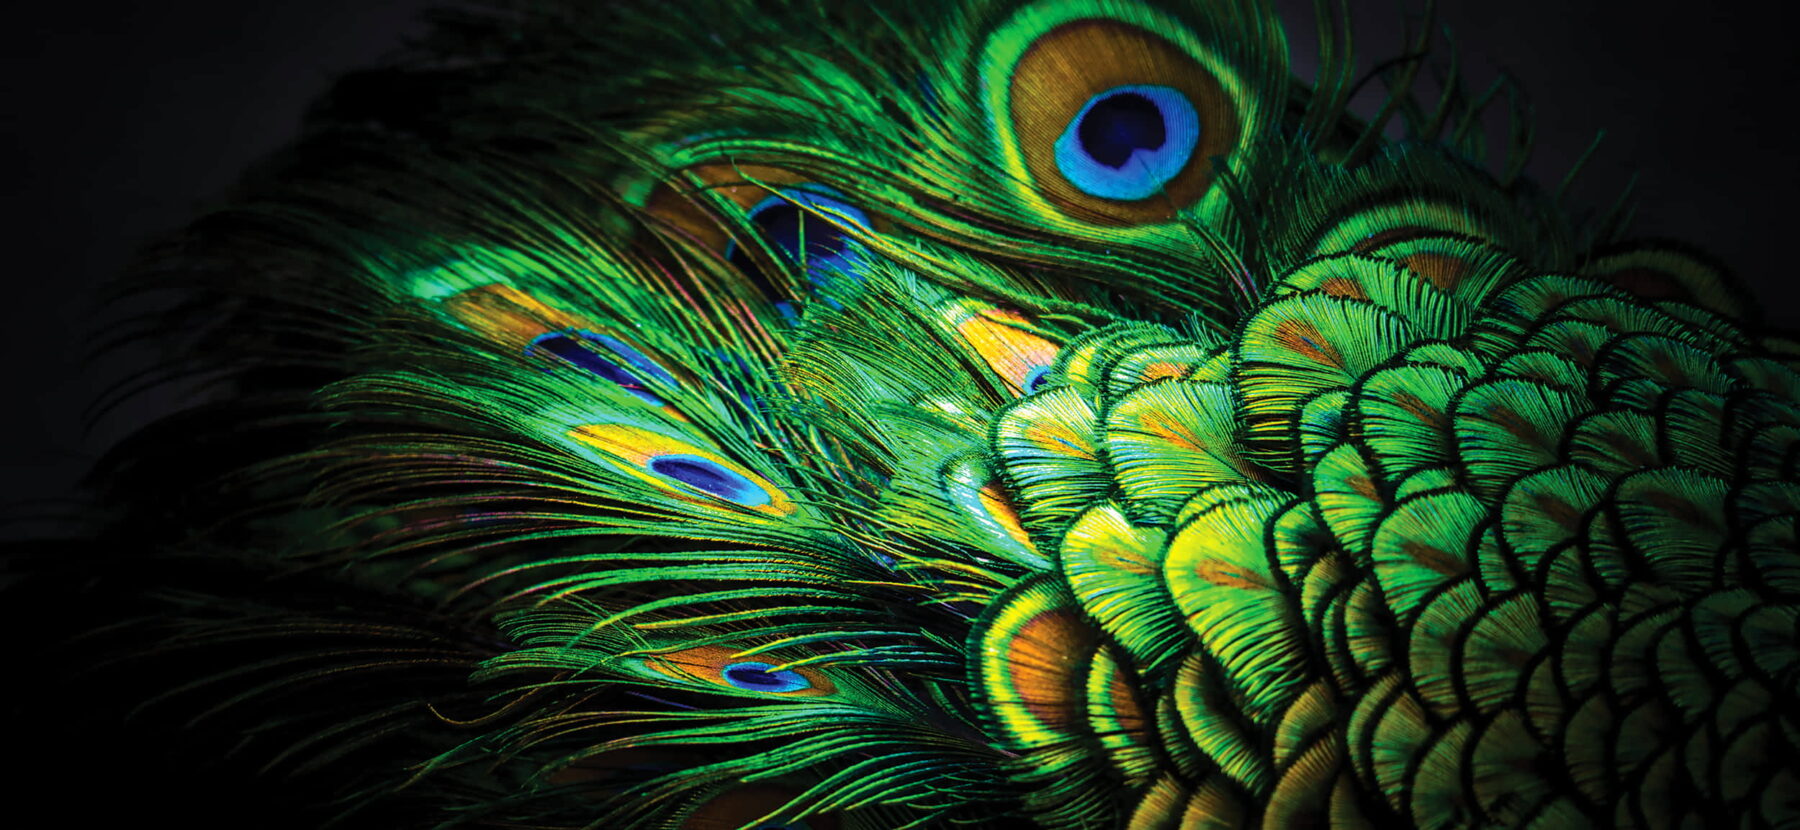 close up photograph of a peacock's tail